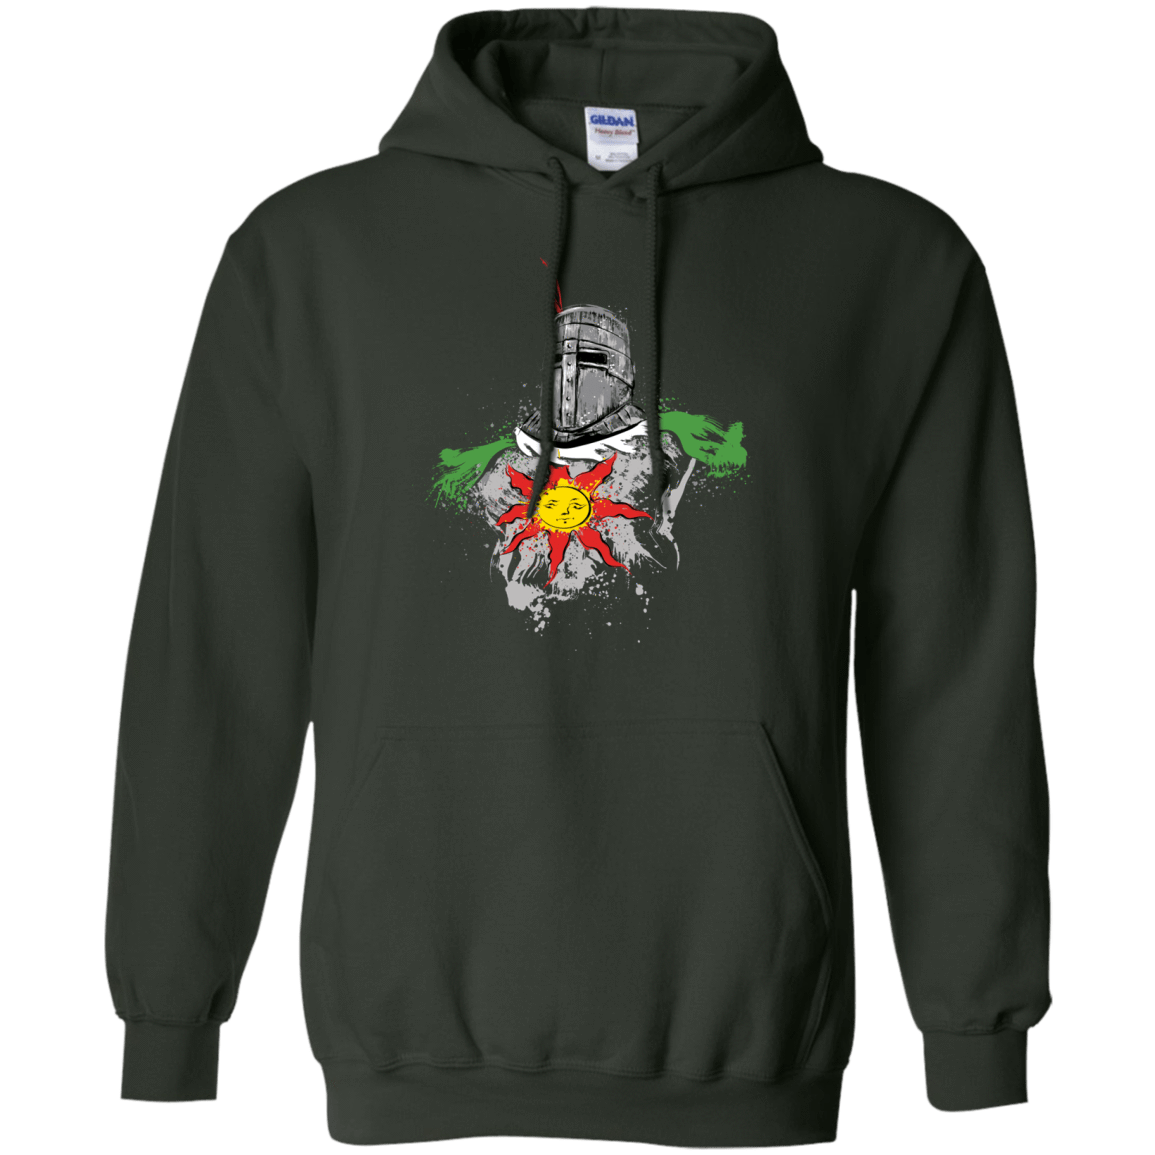 Sweatshirts Forest Green / Small Praise the sun Pullover Hoodie